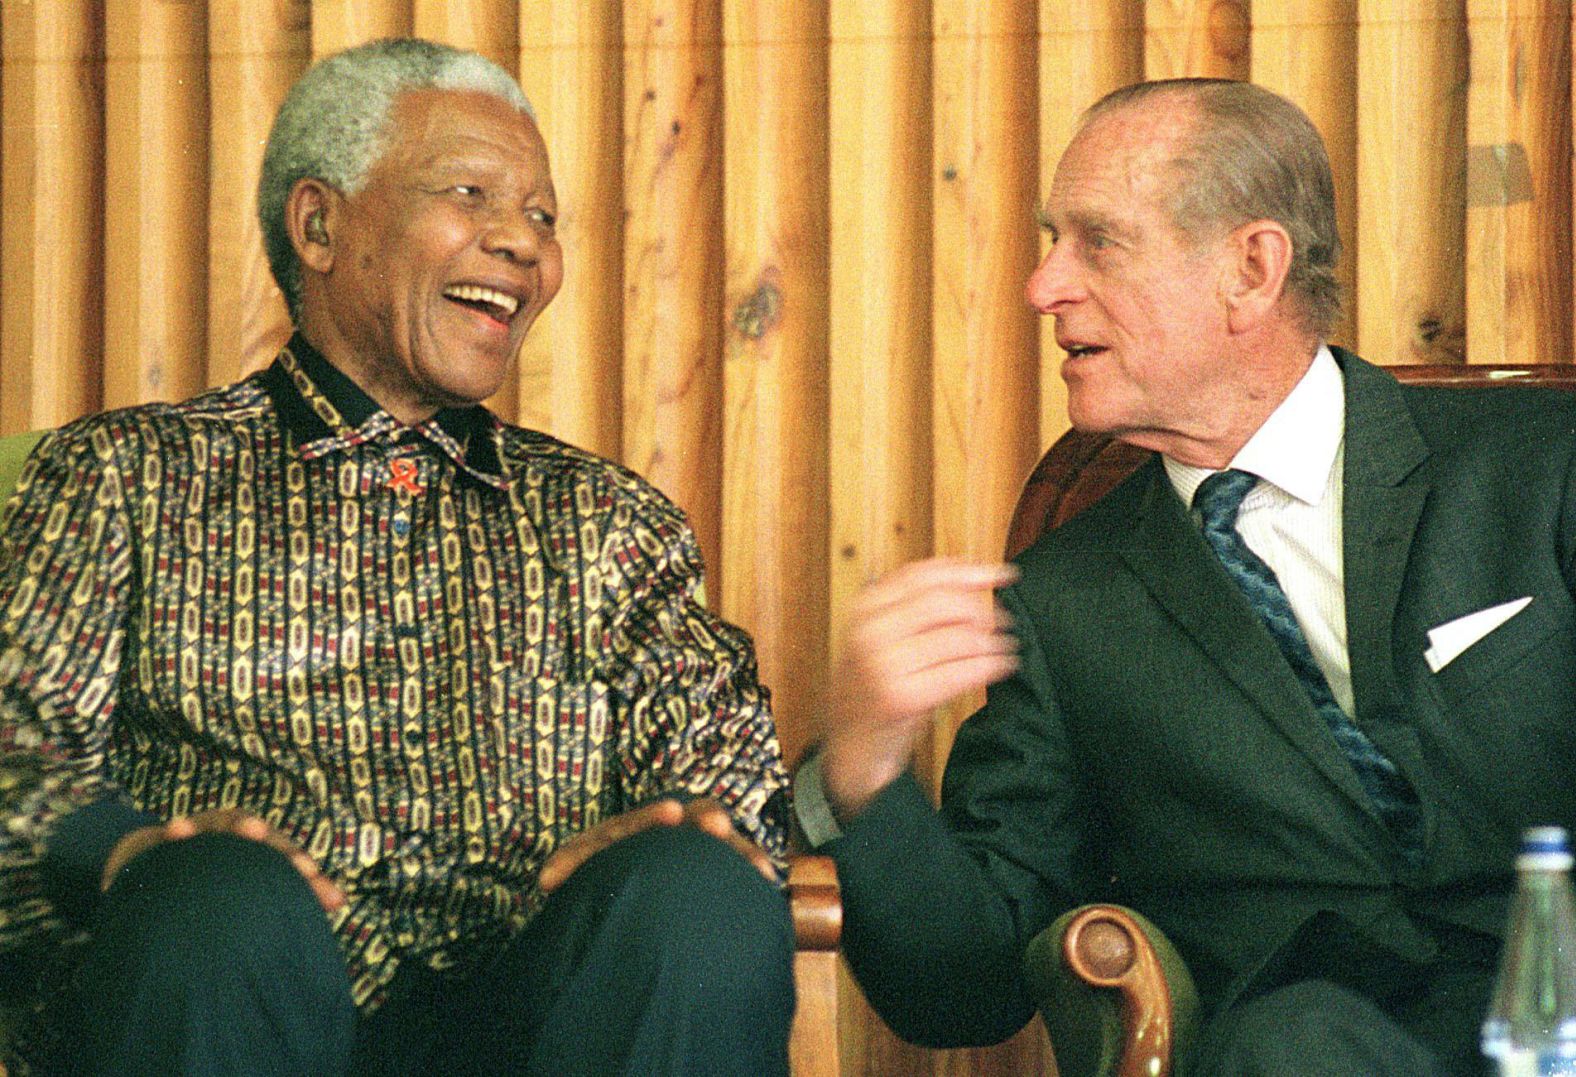 Former South African President Nelson Mandela chats with Prince Philip in November 2000.